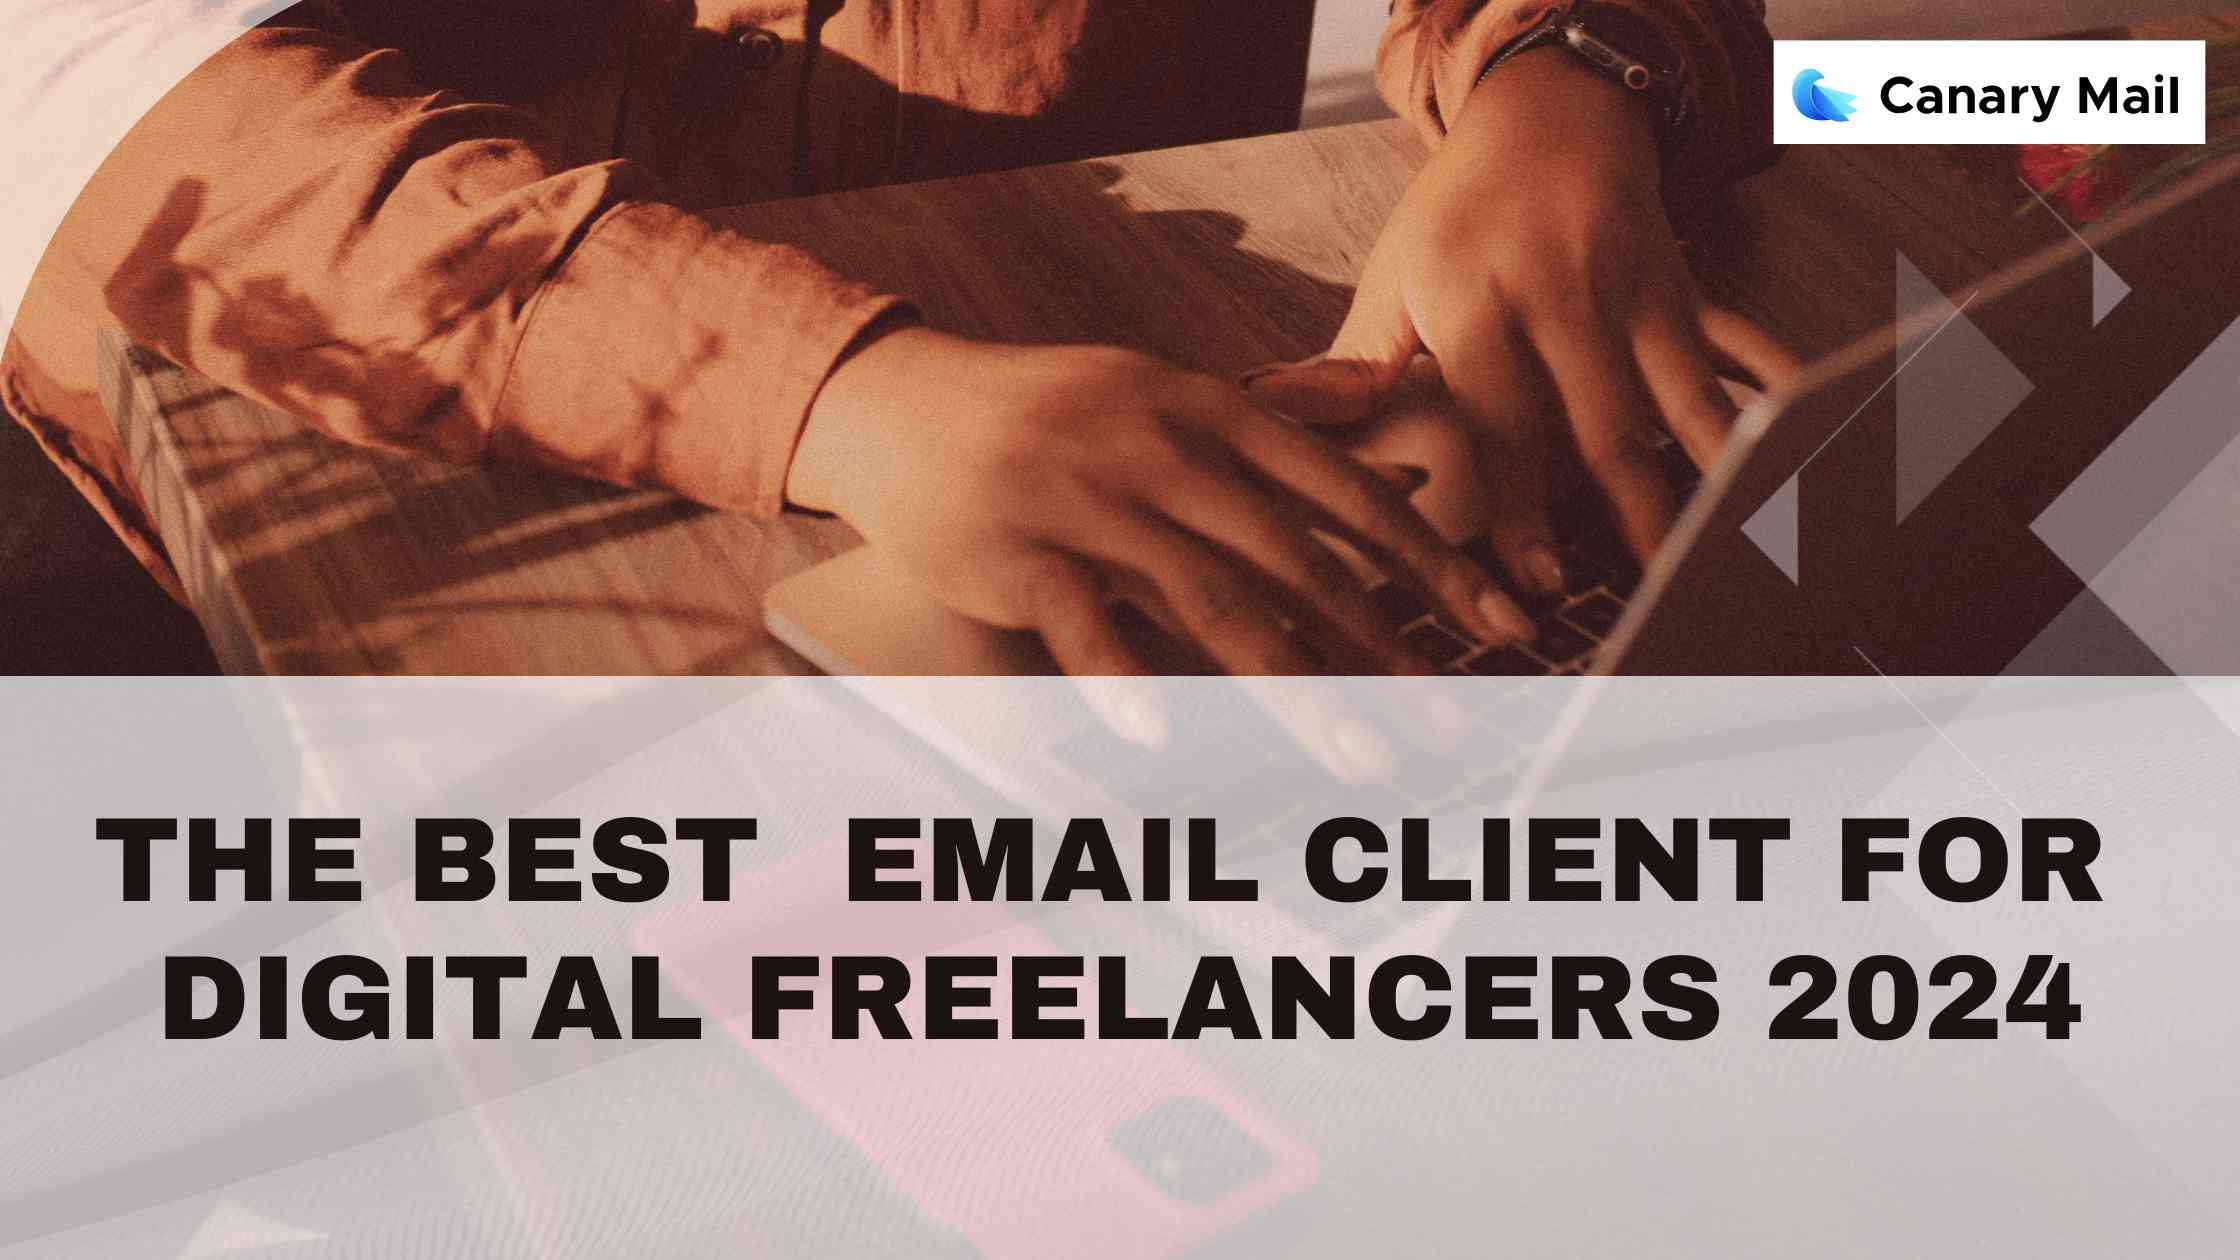 The Best Email Client For Digital Freelancers 2024